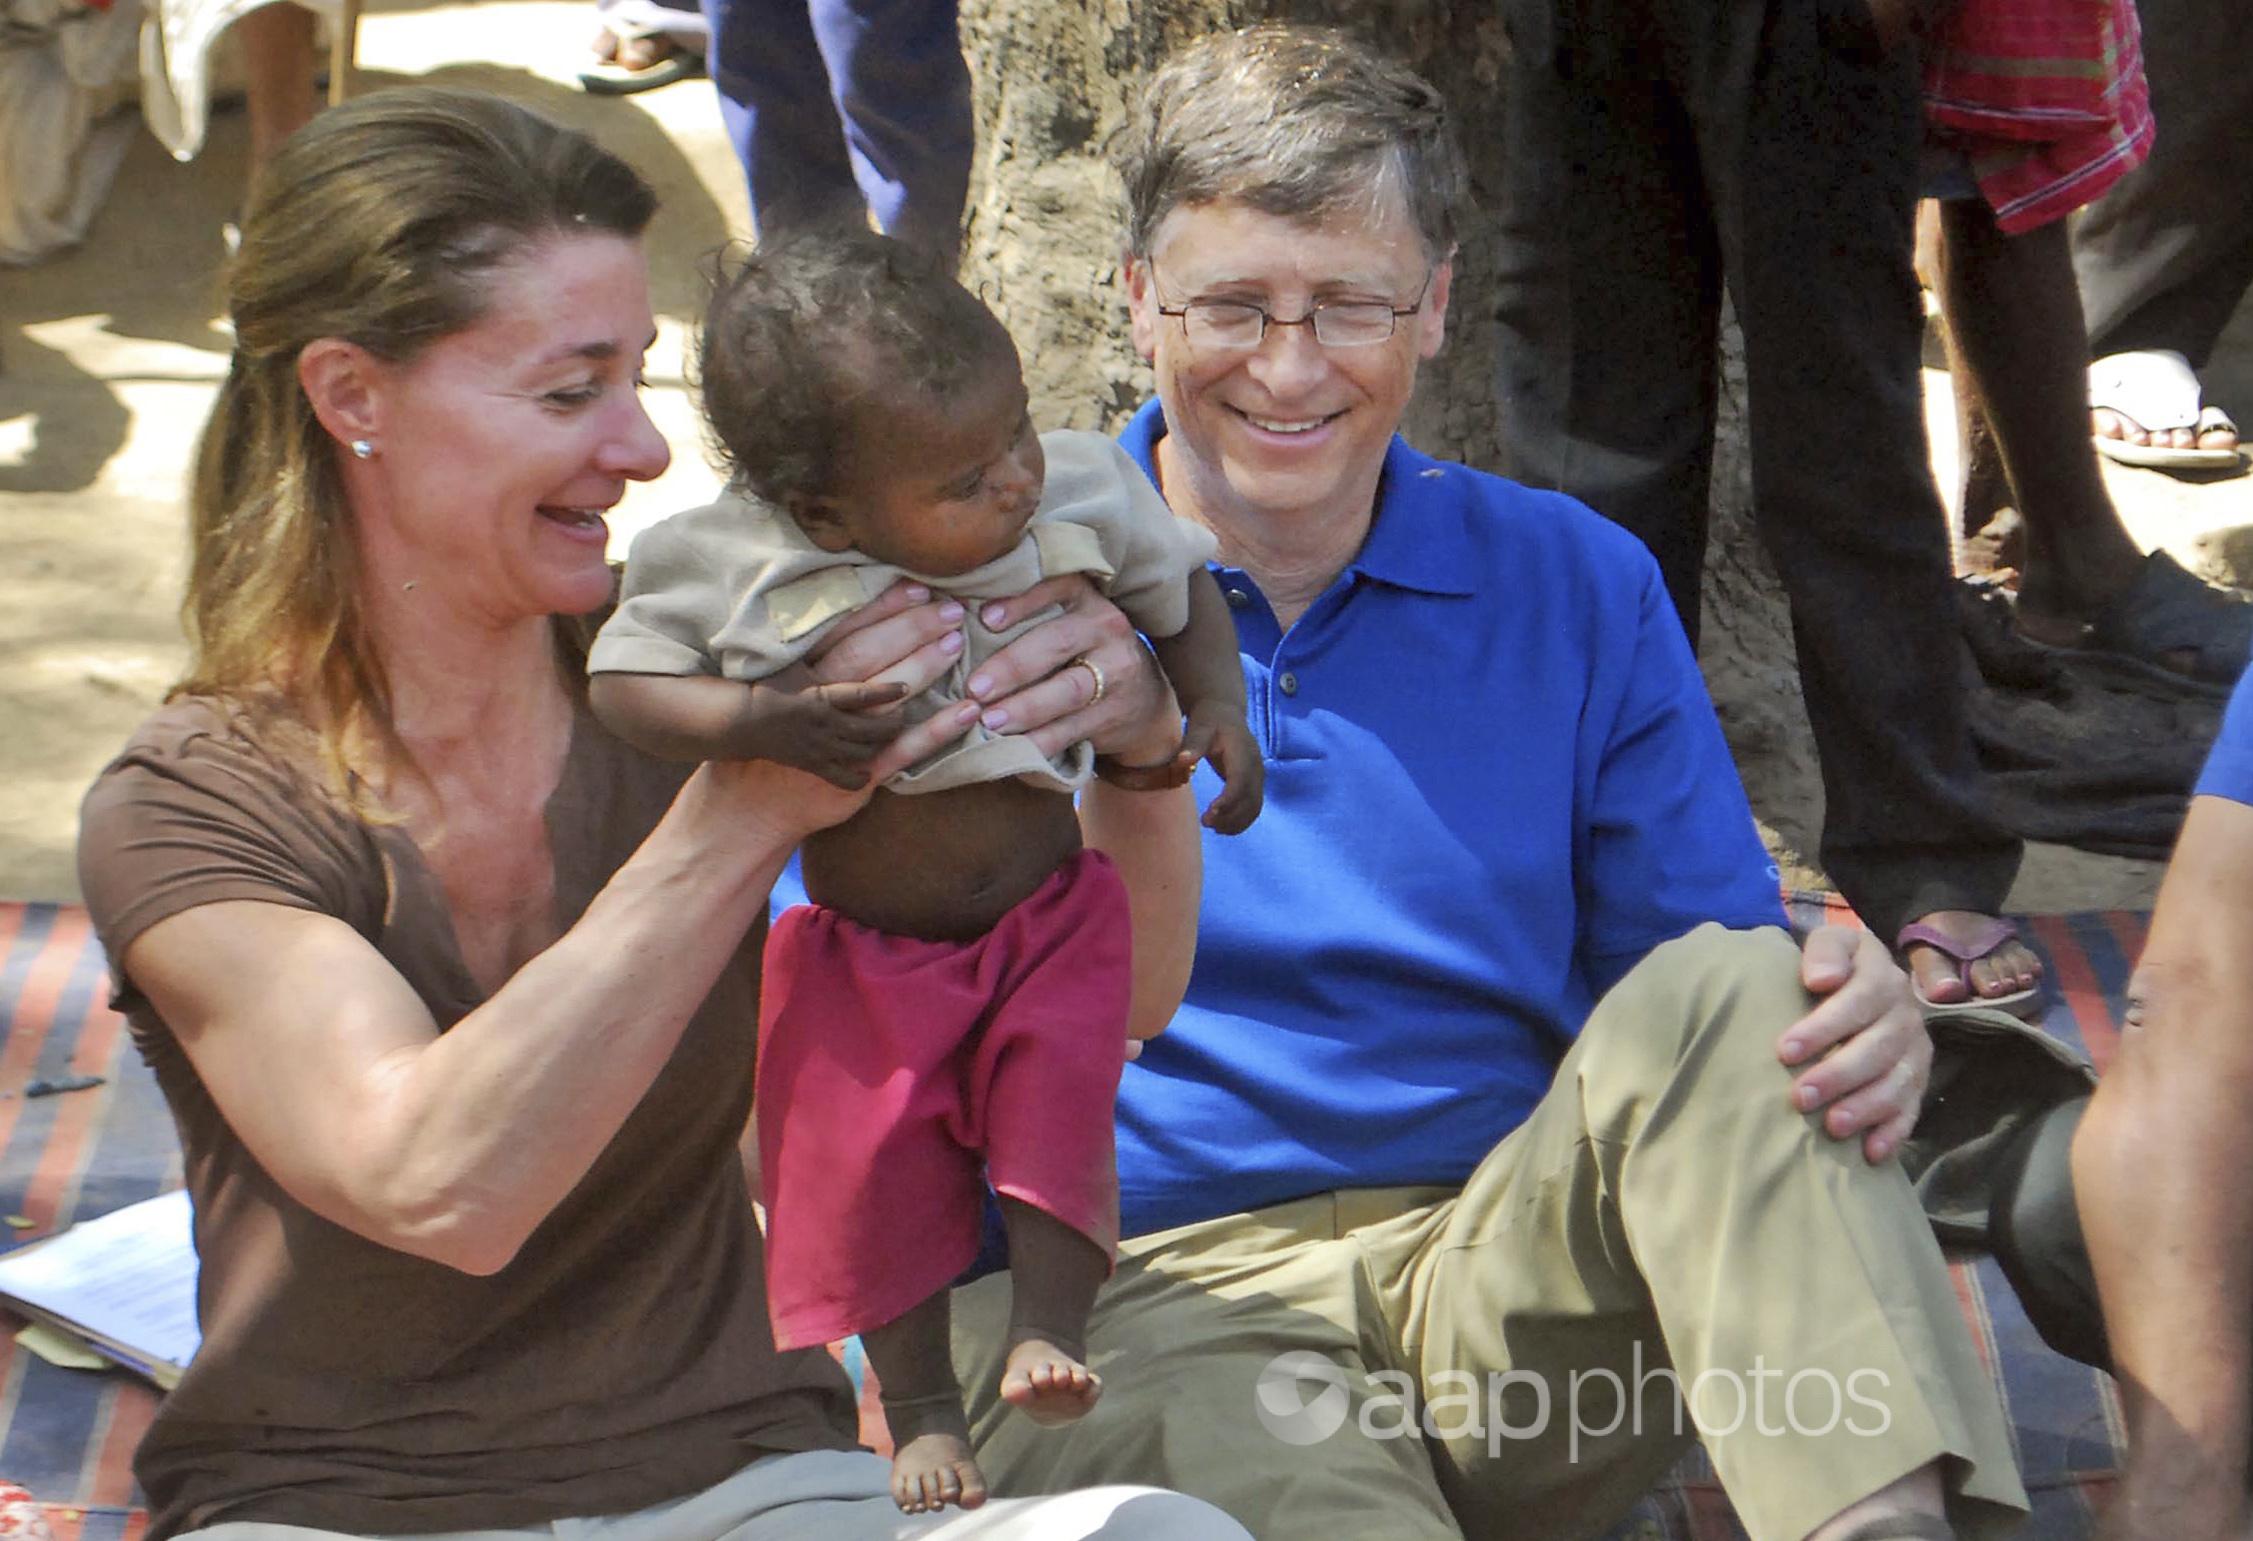 Bill Gates and his wife Melinda